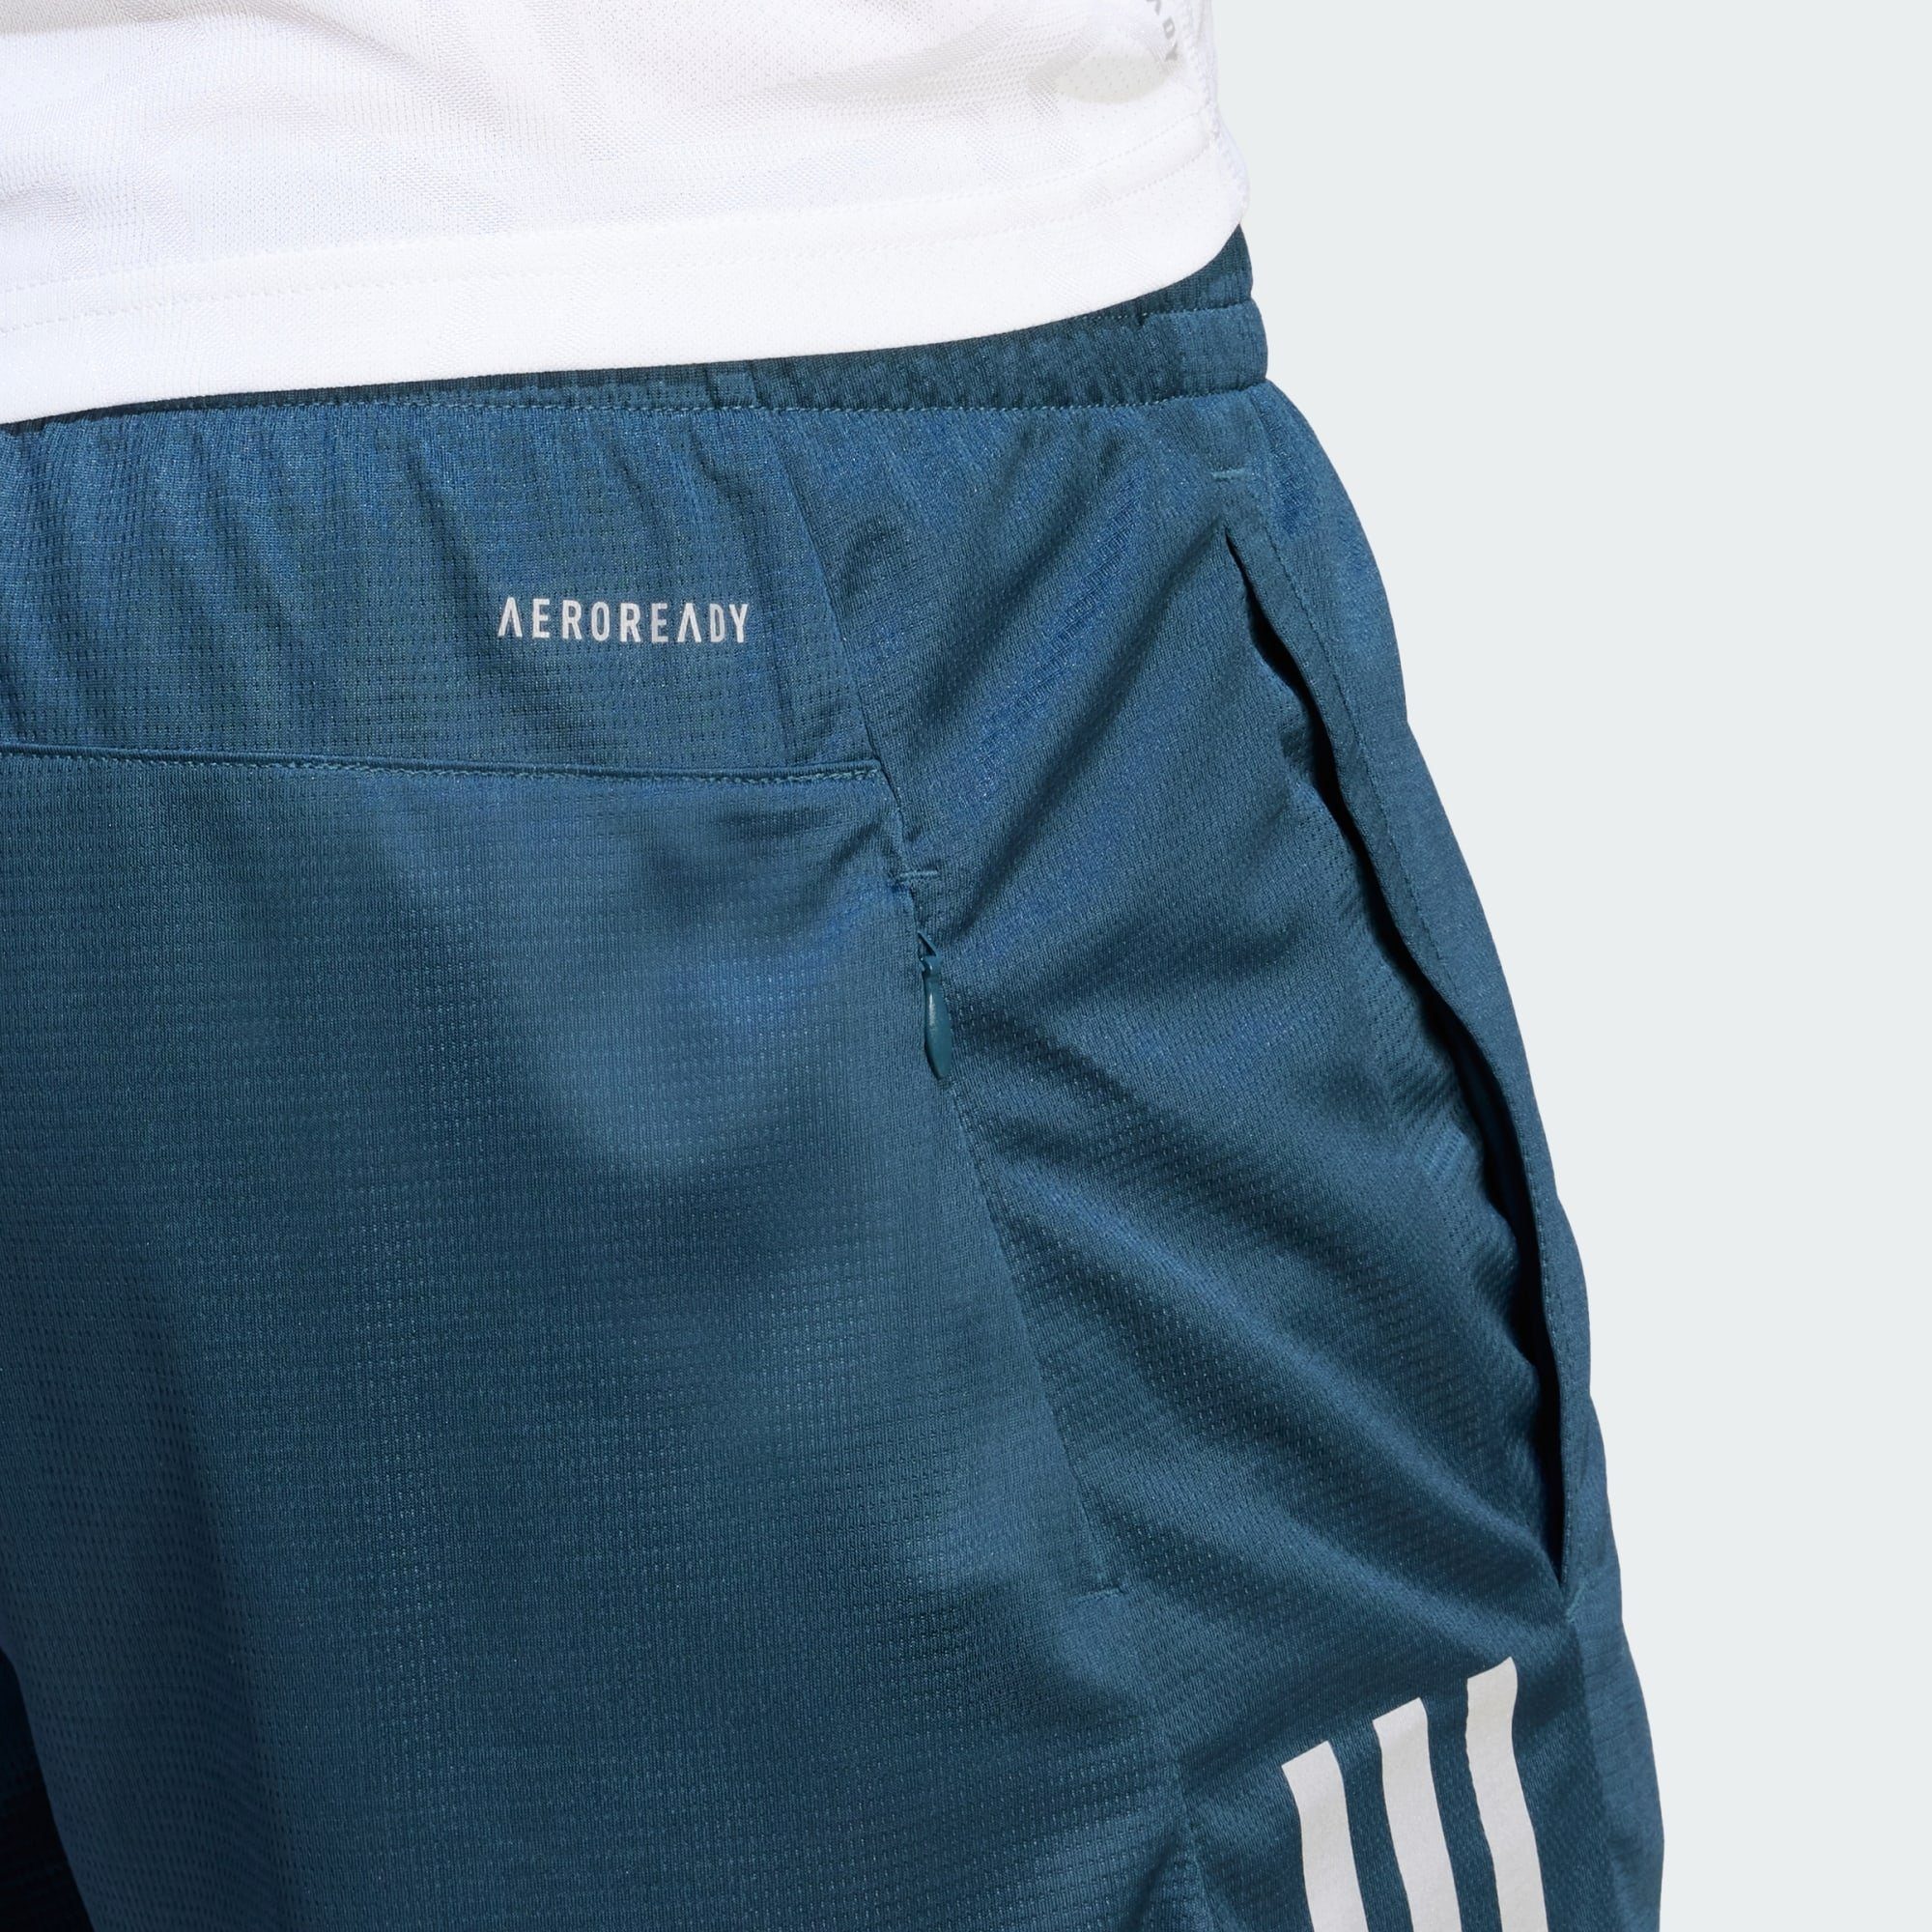 SHORTS RUN Laufshorts OWN MEASURED CARBON THE adidas Performance